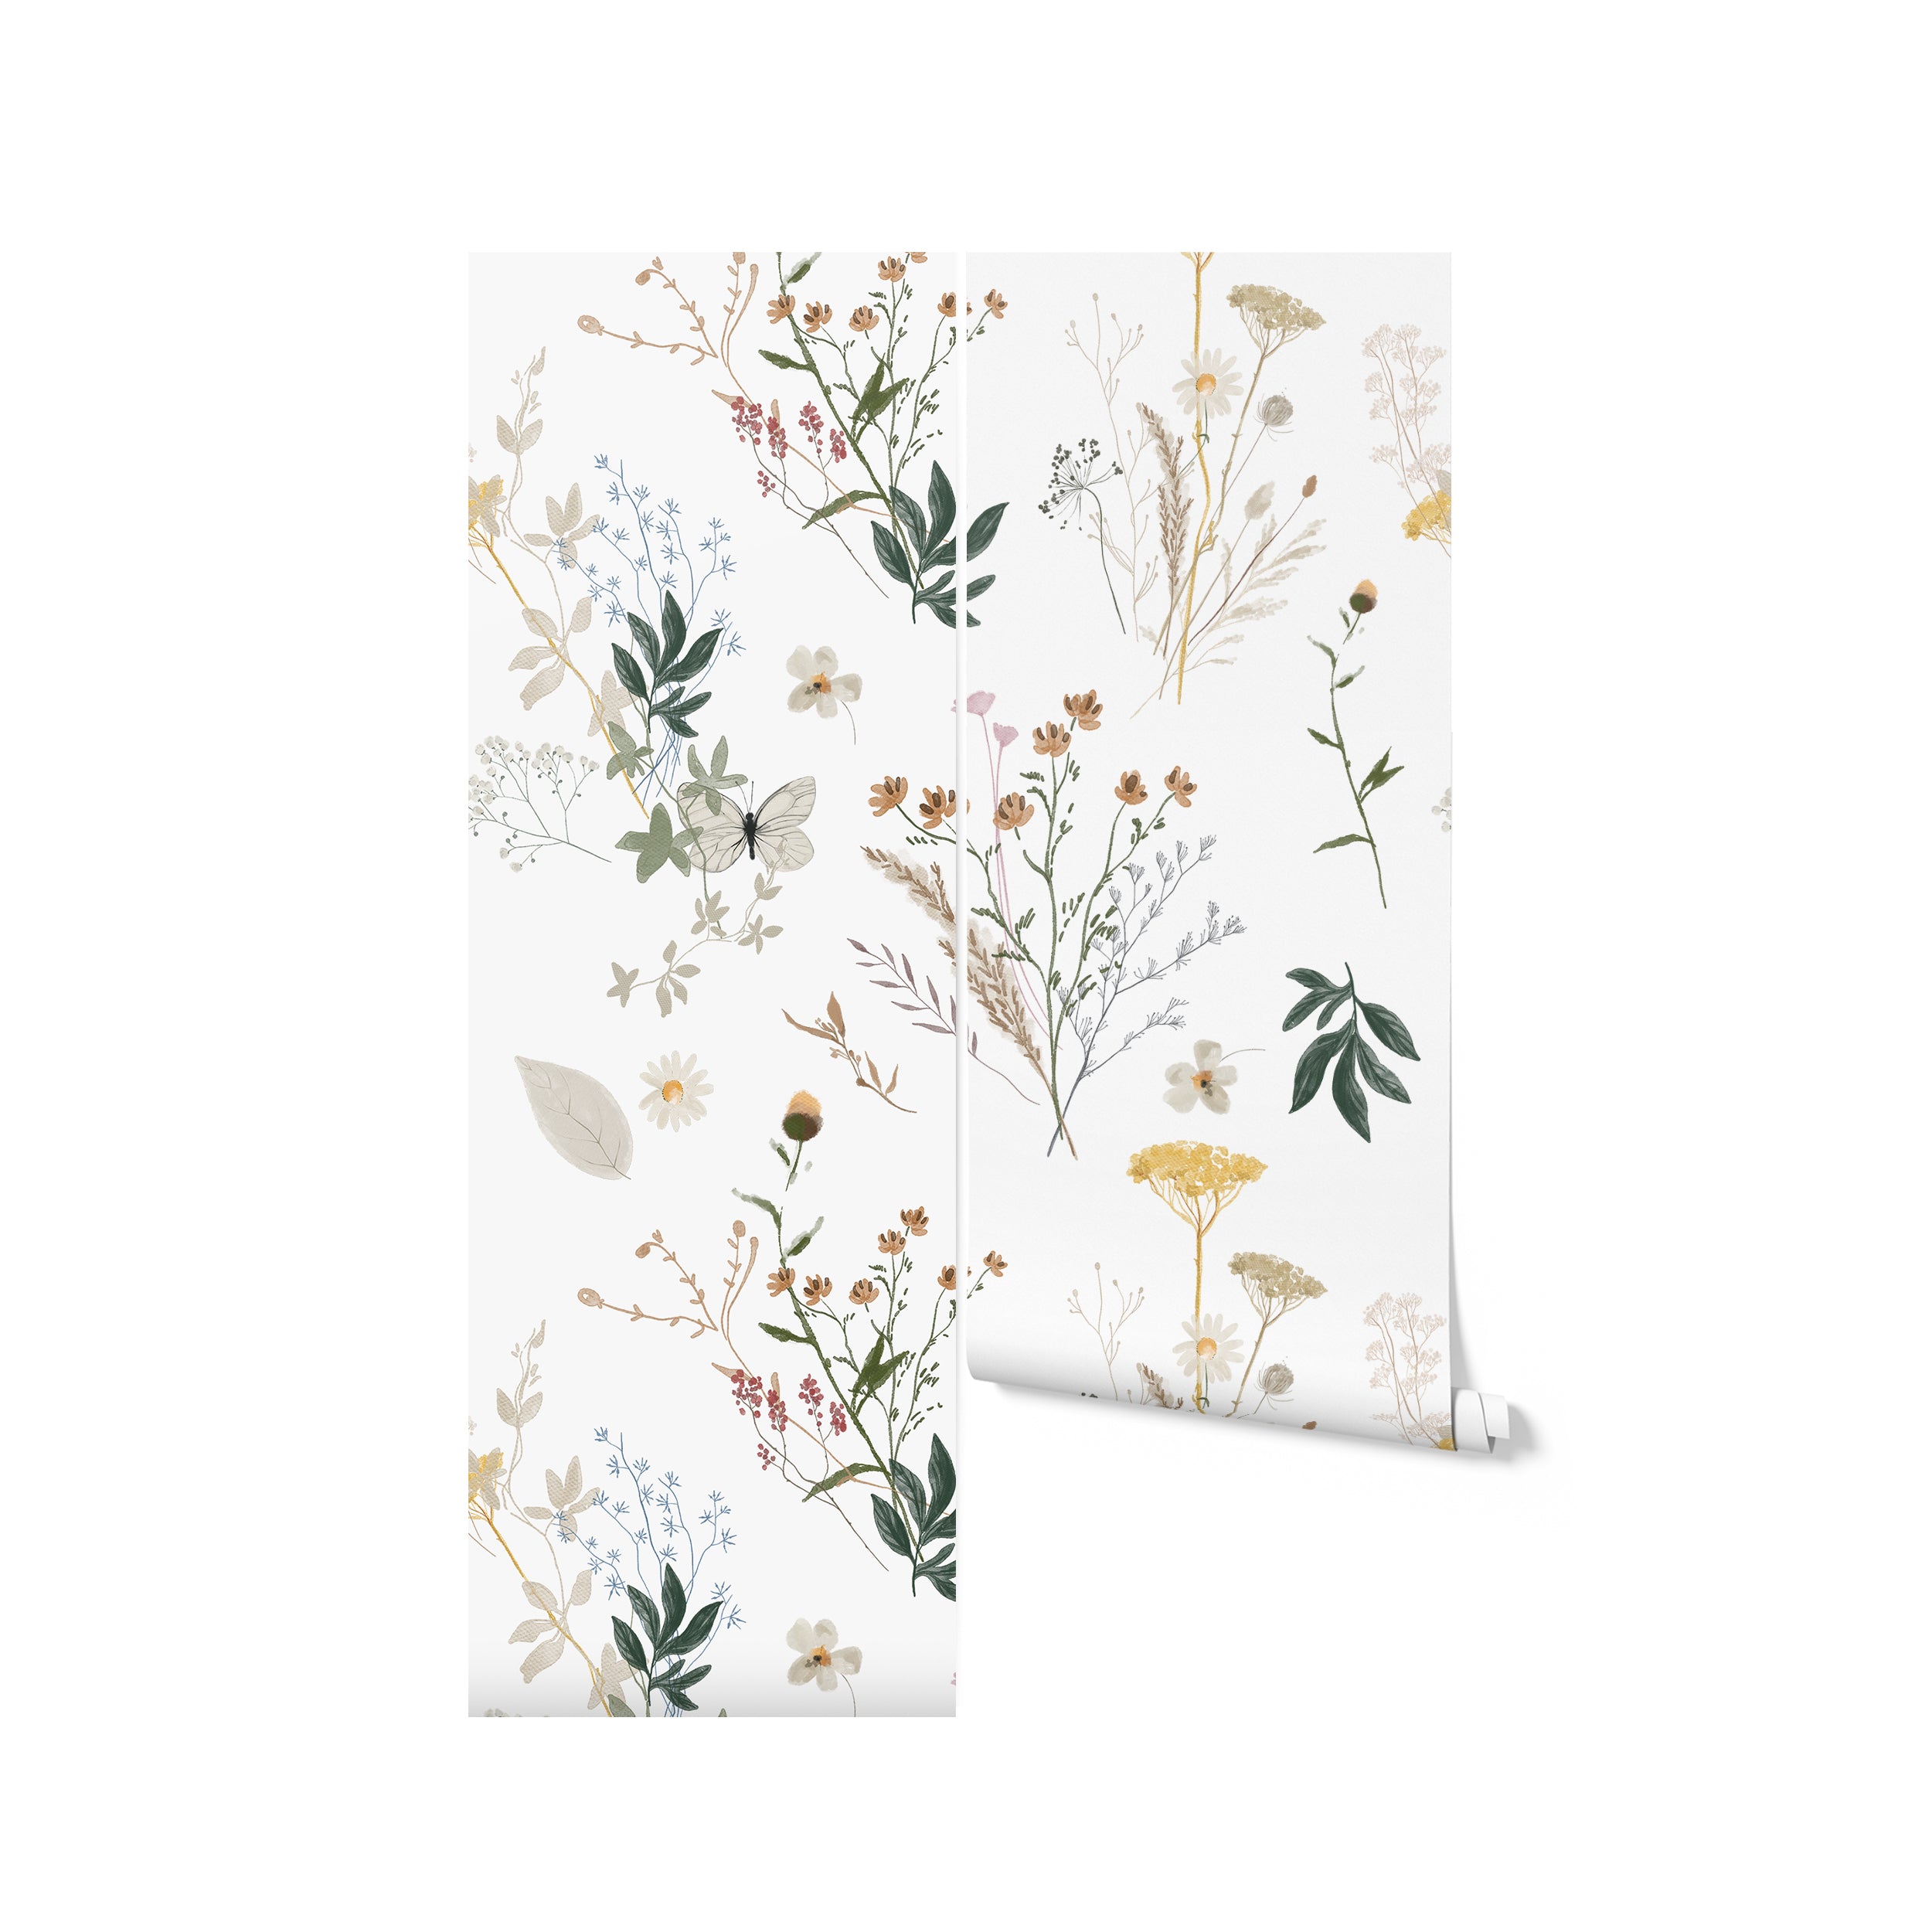 A roll of Aerie Floral Wallpaper unfurled slightly to reveal its intricate pattern of various garden flowers, leaves, and butterflies in soft, pastel colors. The design evokes a peaceful and elegant atmosphere, suitable for enhancing any living space with a touch of nature.